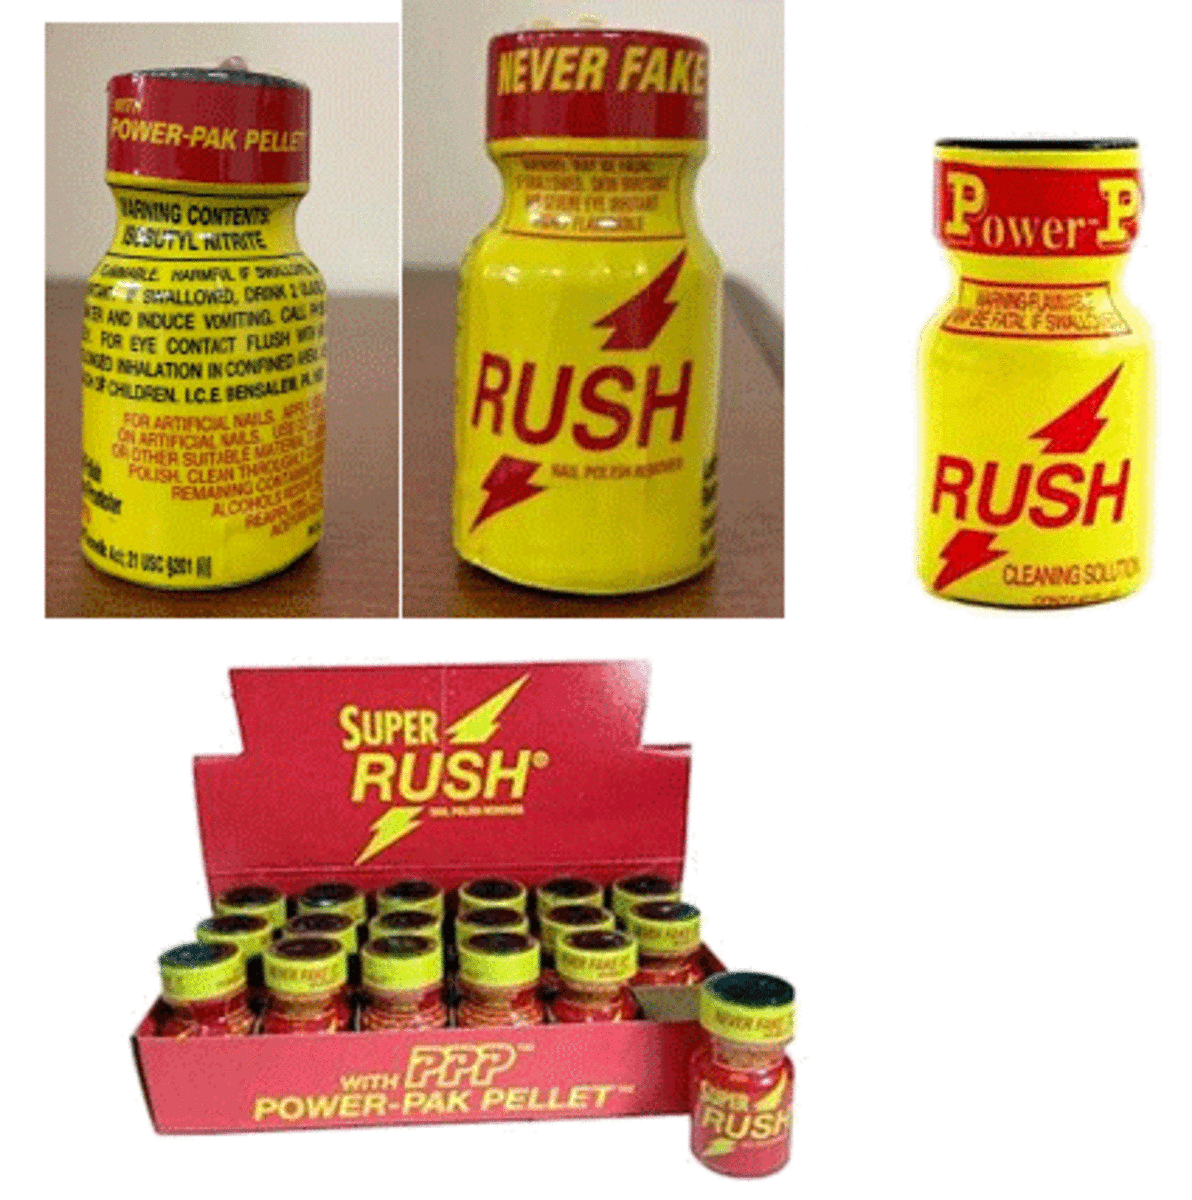 Rush, a nitrite sold in sex stores, has been flagged by the FDA as a dangerous inhalant that should not be used. 